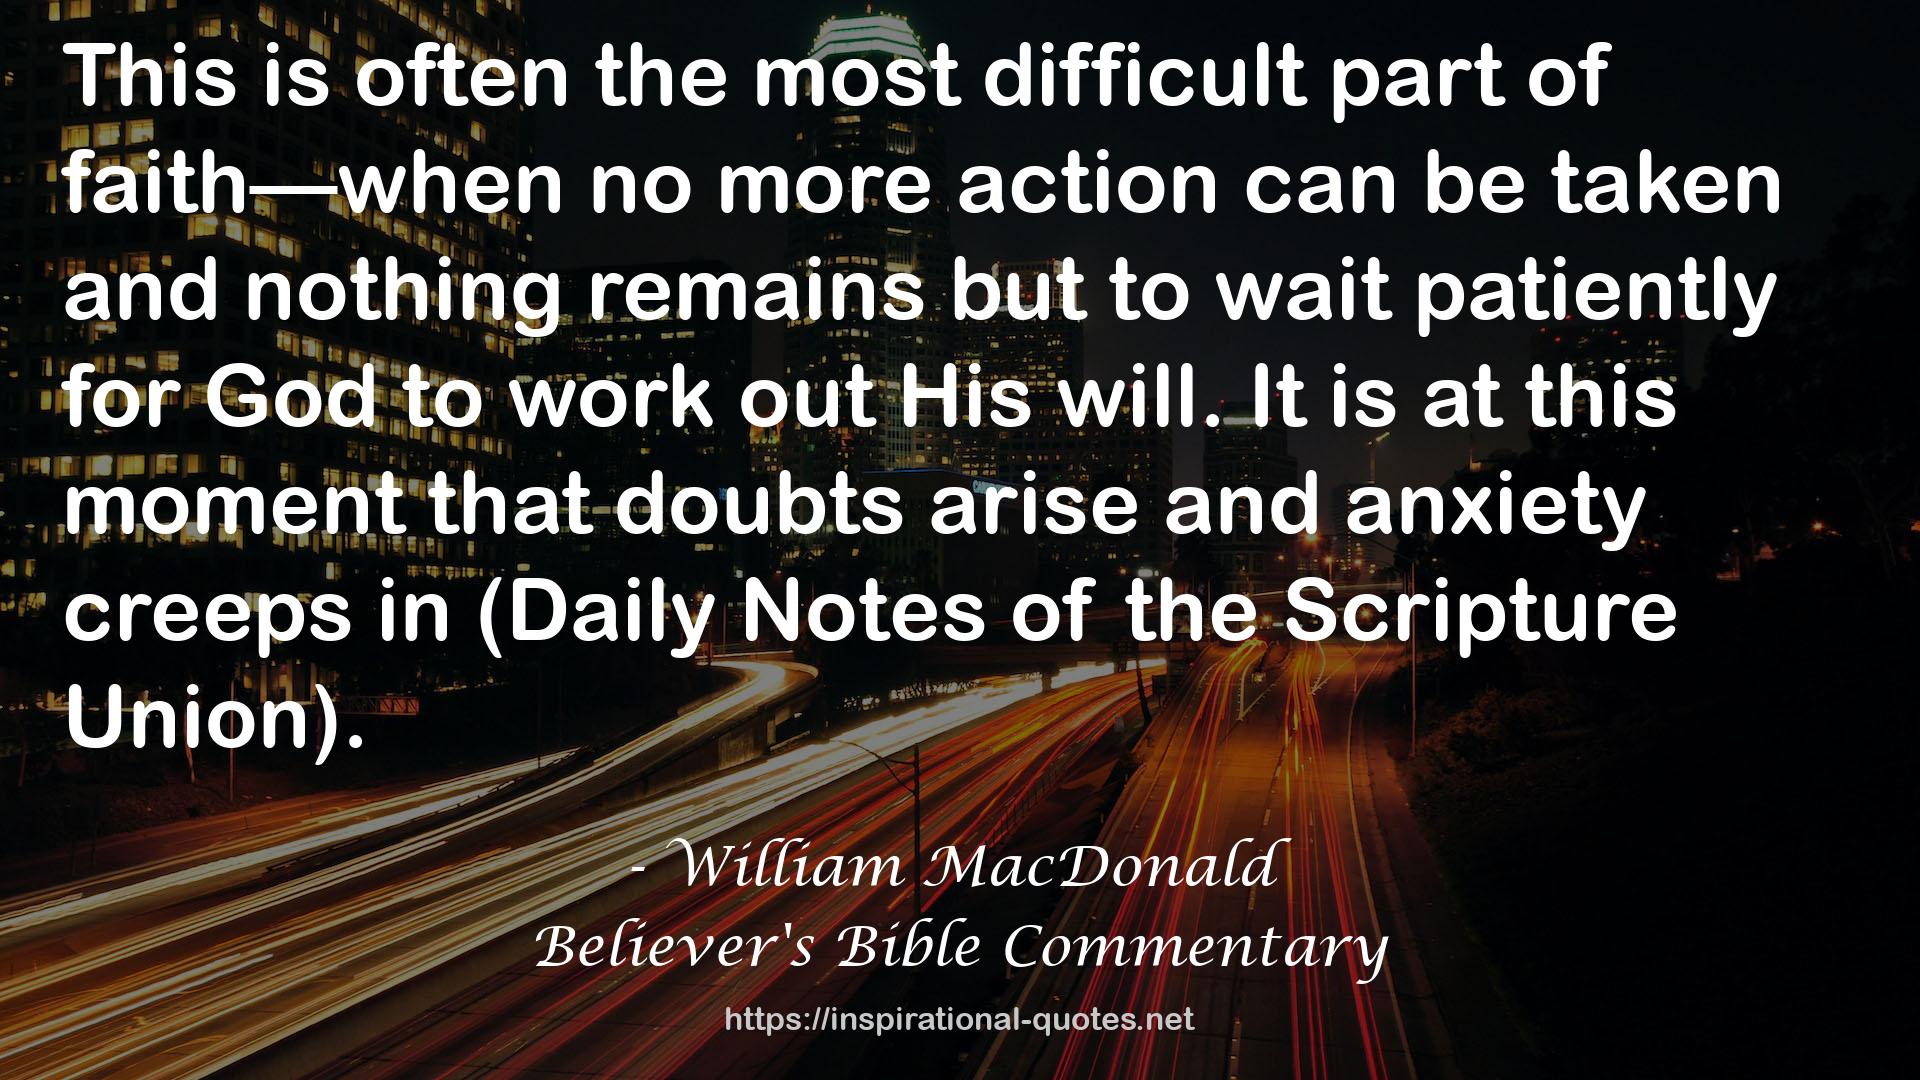 Believer's Bible Commentary QUOTES